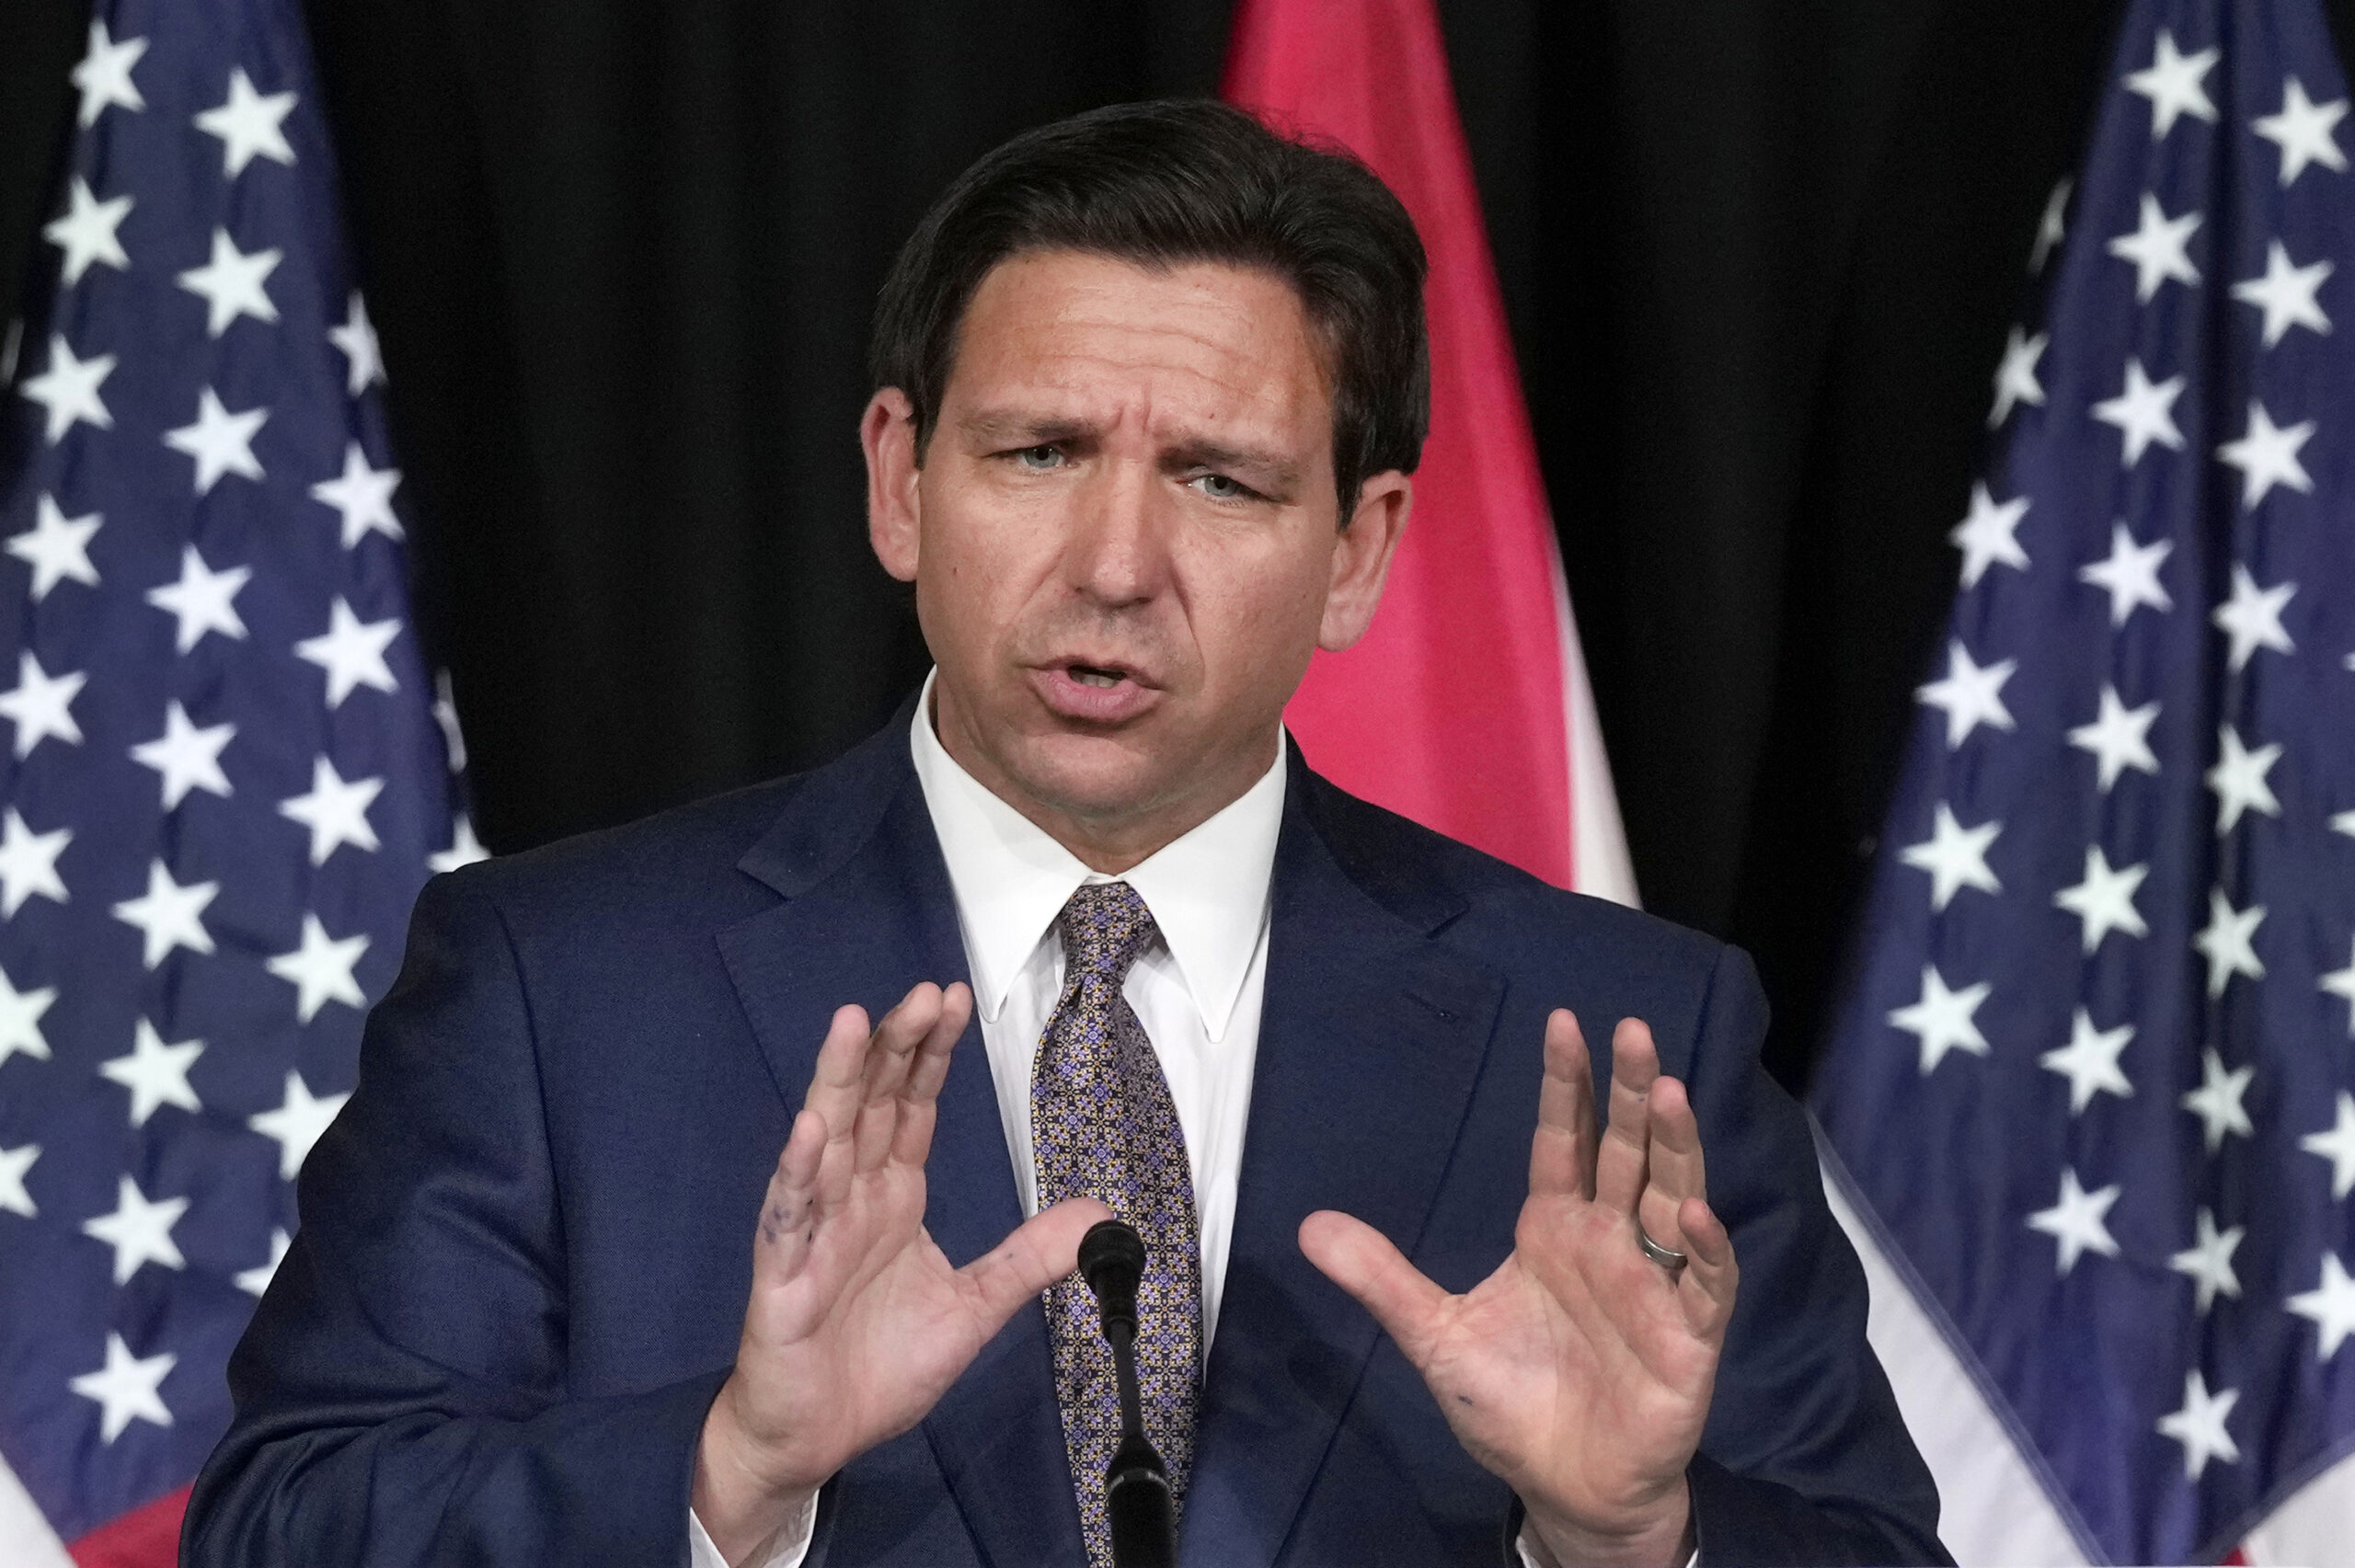 DeSantis New Hampshire Fundraiser Breaks Record for the State’s GOP